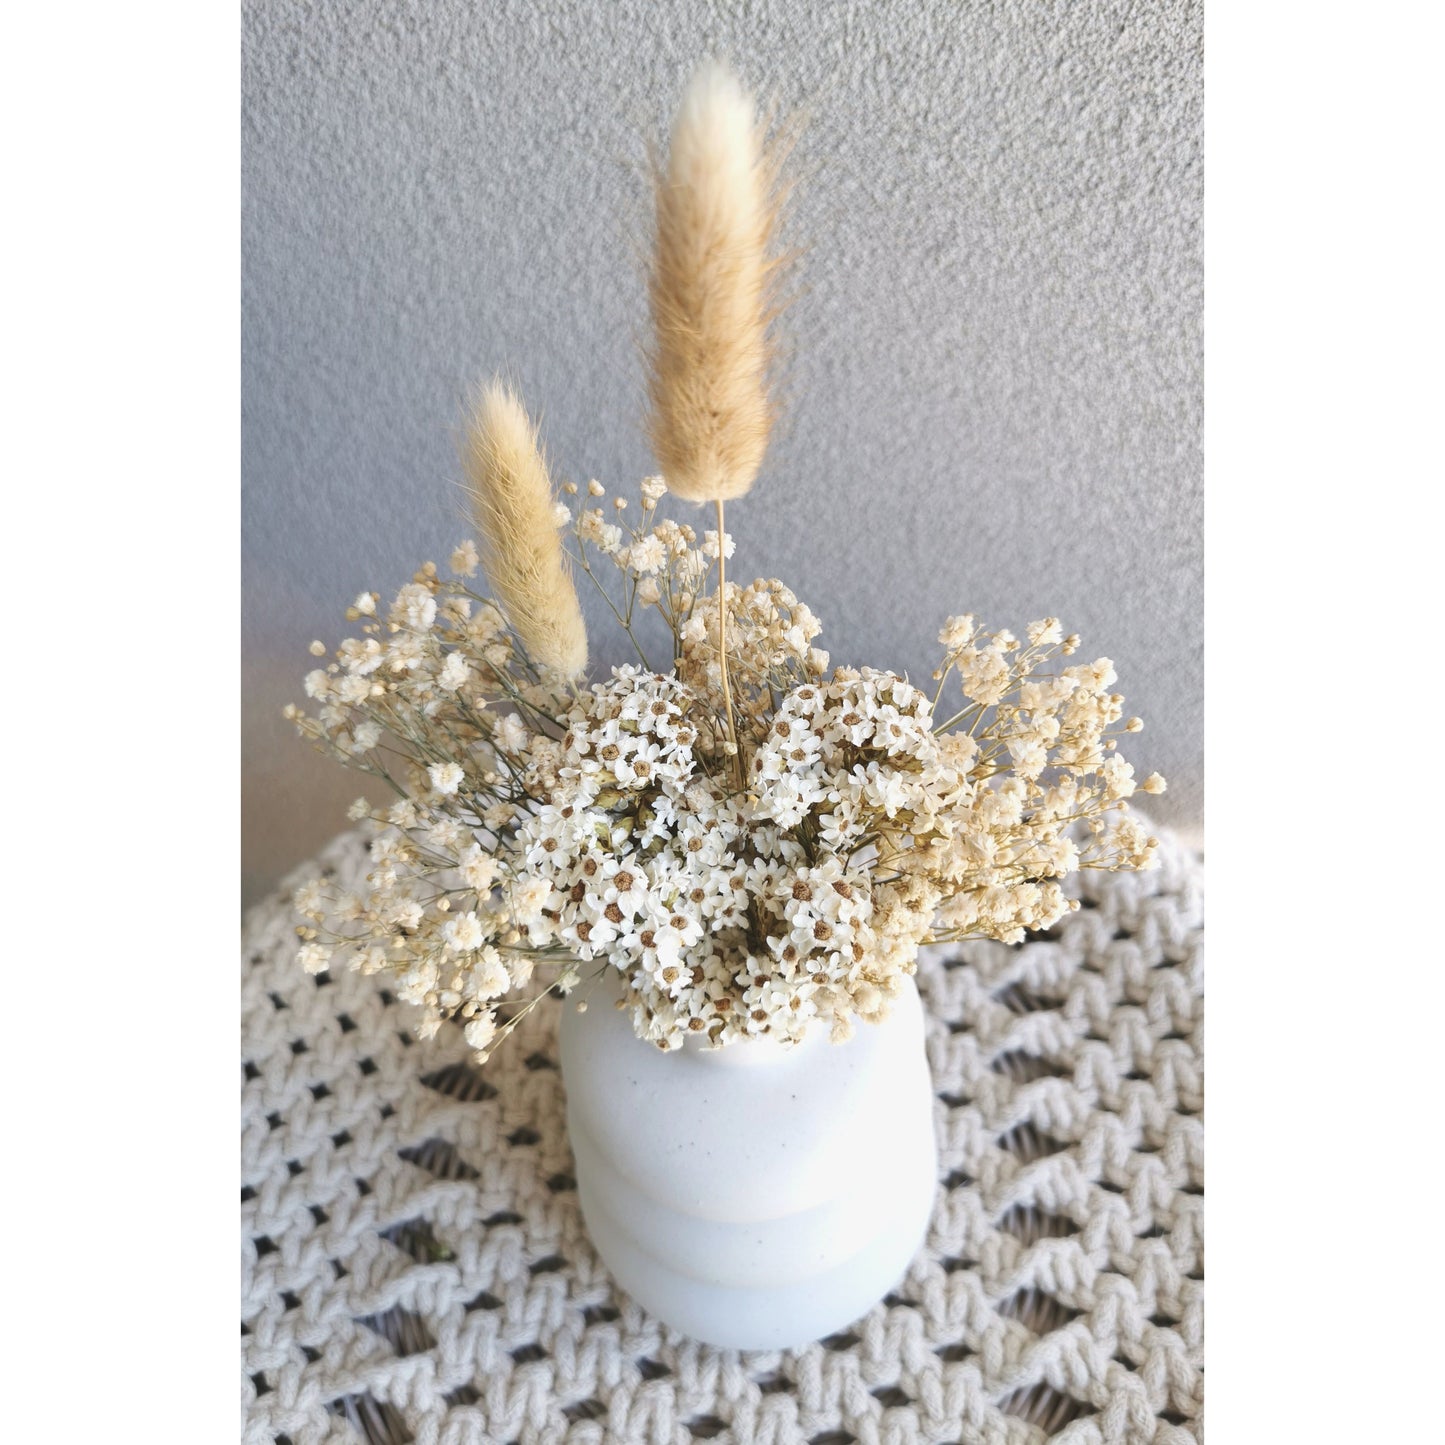 Cream, beige & white dried flowers in white bubble vase. Picture shows the arrangement sitting on a table against a blank wall with the view showing from the top